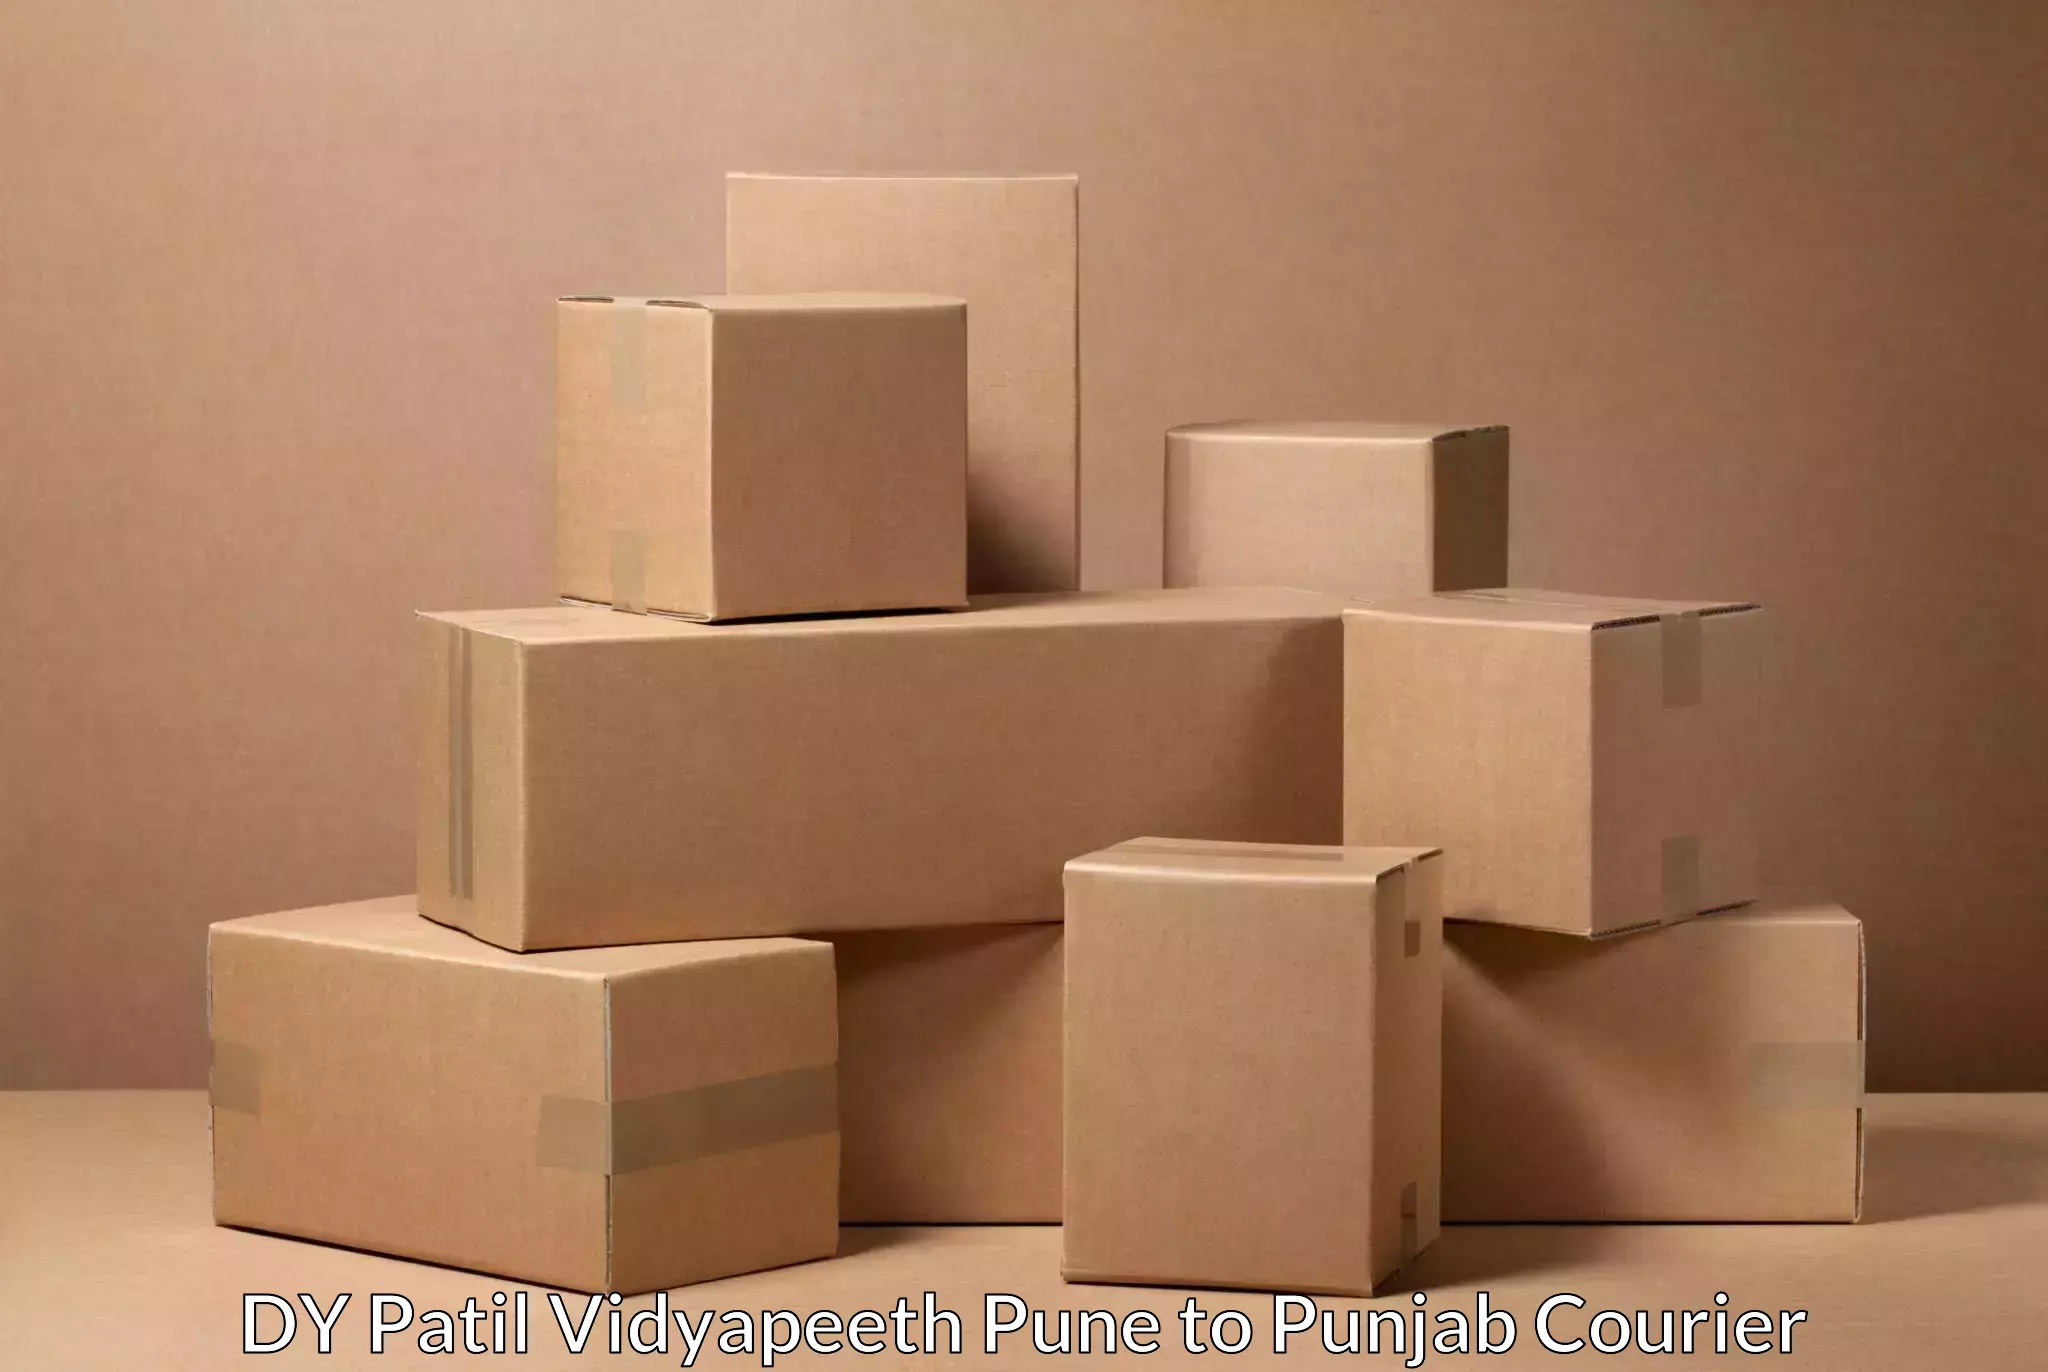 Professional parcel services DY Patil Vidyapeeth Pune to Dasuya